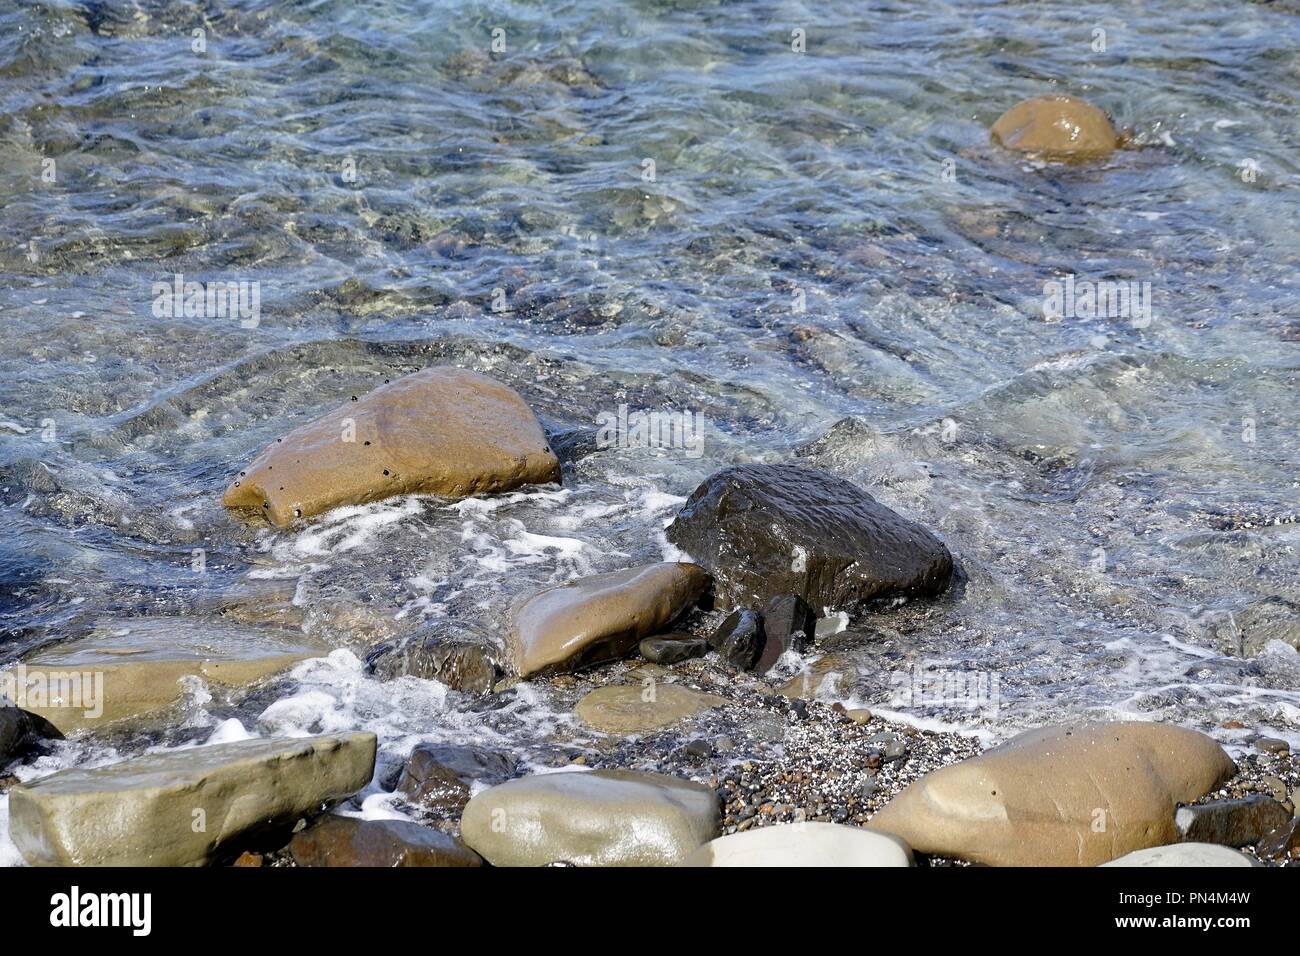 Large rounded rocks, small pebbles and shell grit at the edge of the sea water. Ripples in the shallow water. Stock Photo